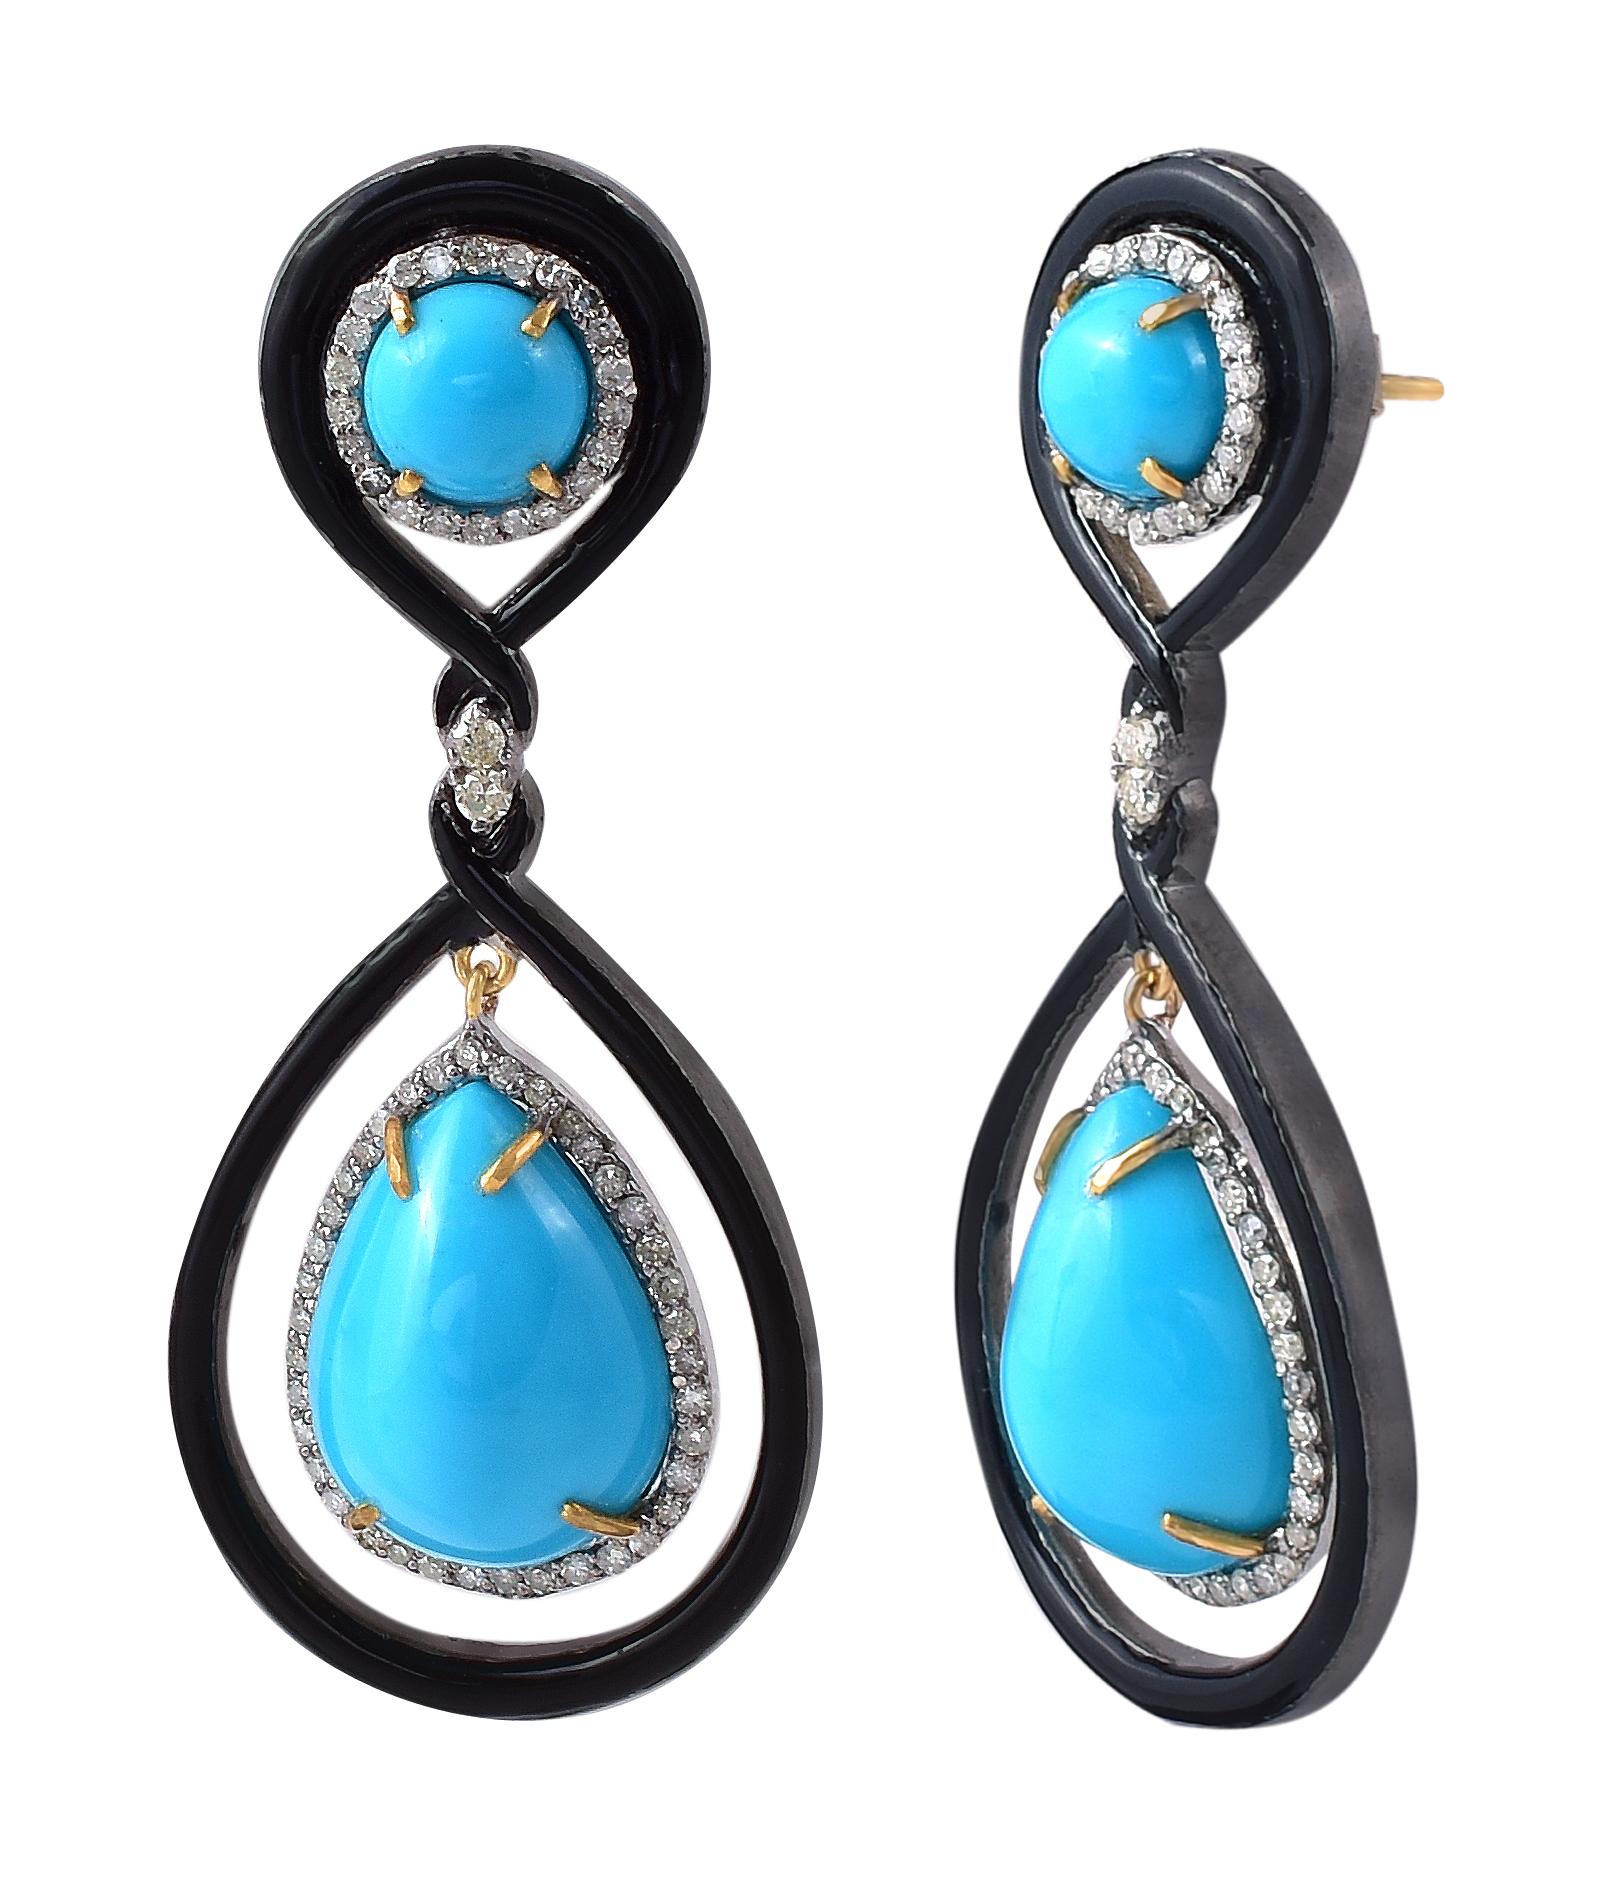 18.06 Carat Turquoise and Diamond Dangle Earrings in Contemporary Victorian Style

Details of the piece:
Gross Weight: 12.97 grams 
Diamond: 0.96 carats
Turquoise: 17.10 carats

Note:
The size of the earrings can be changed.
This piece can be